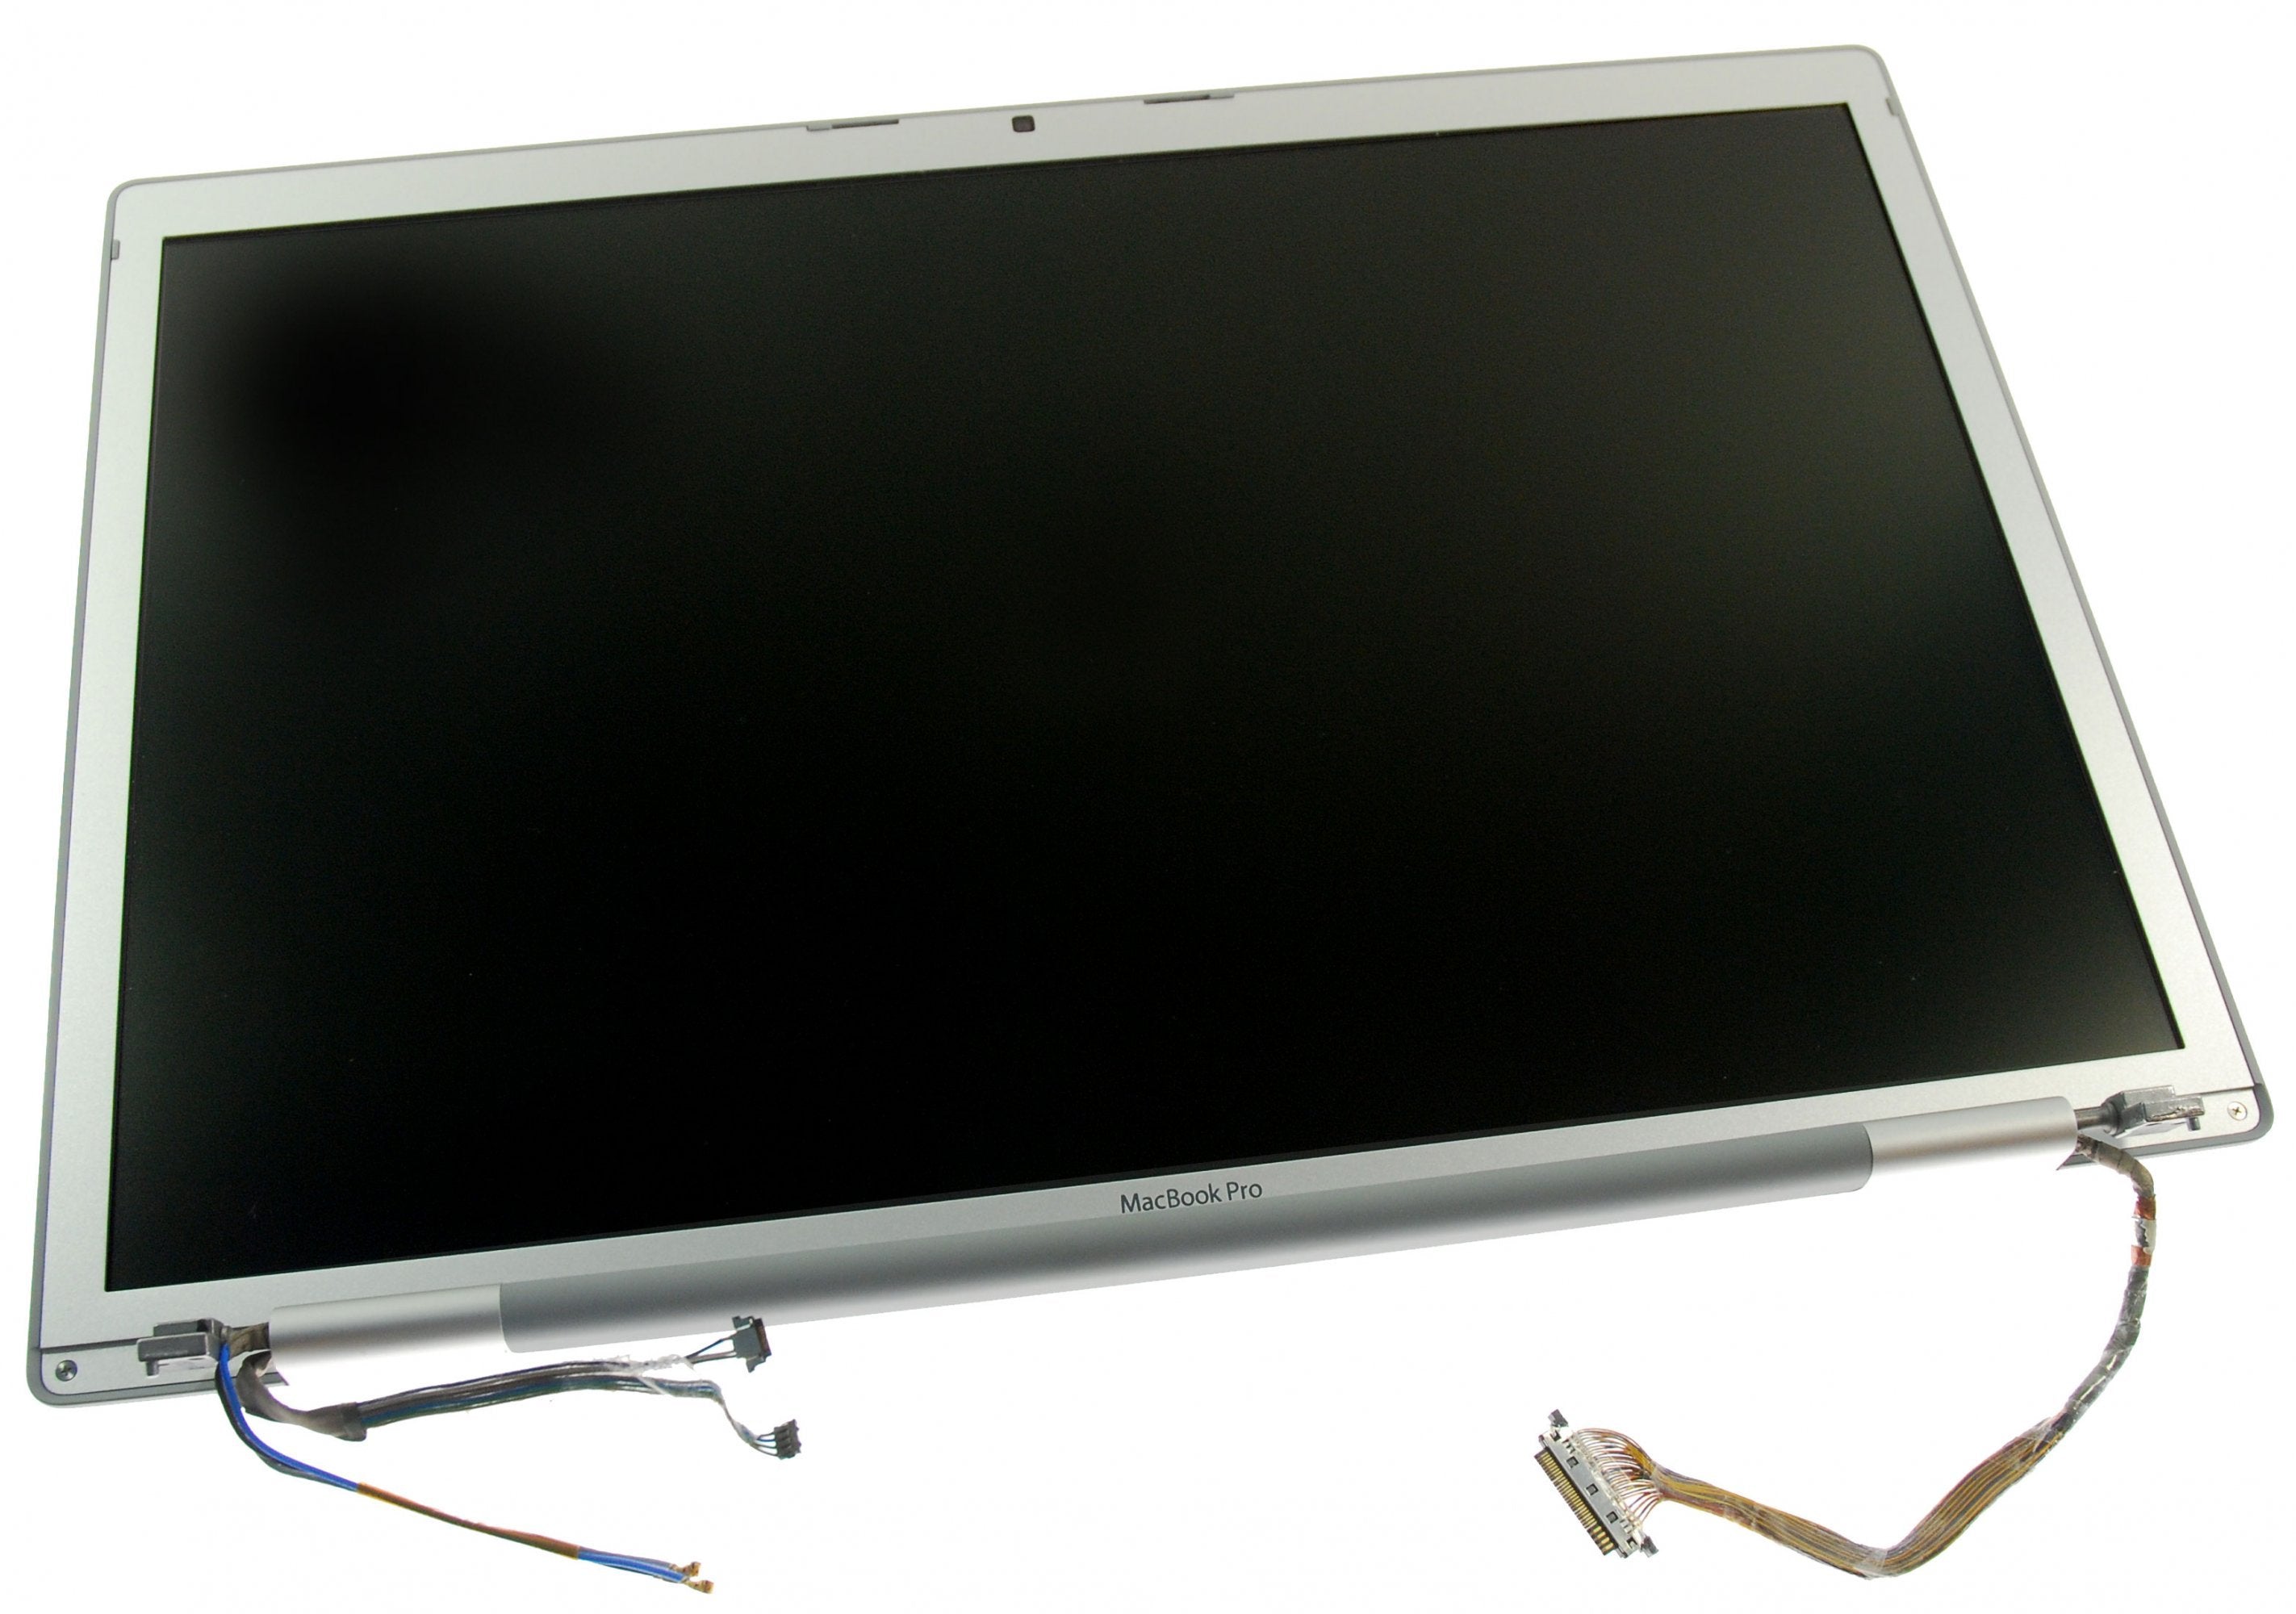 MacBook Pro 15" (Model A1211) Display Assembly